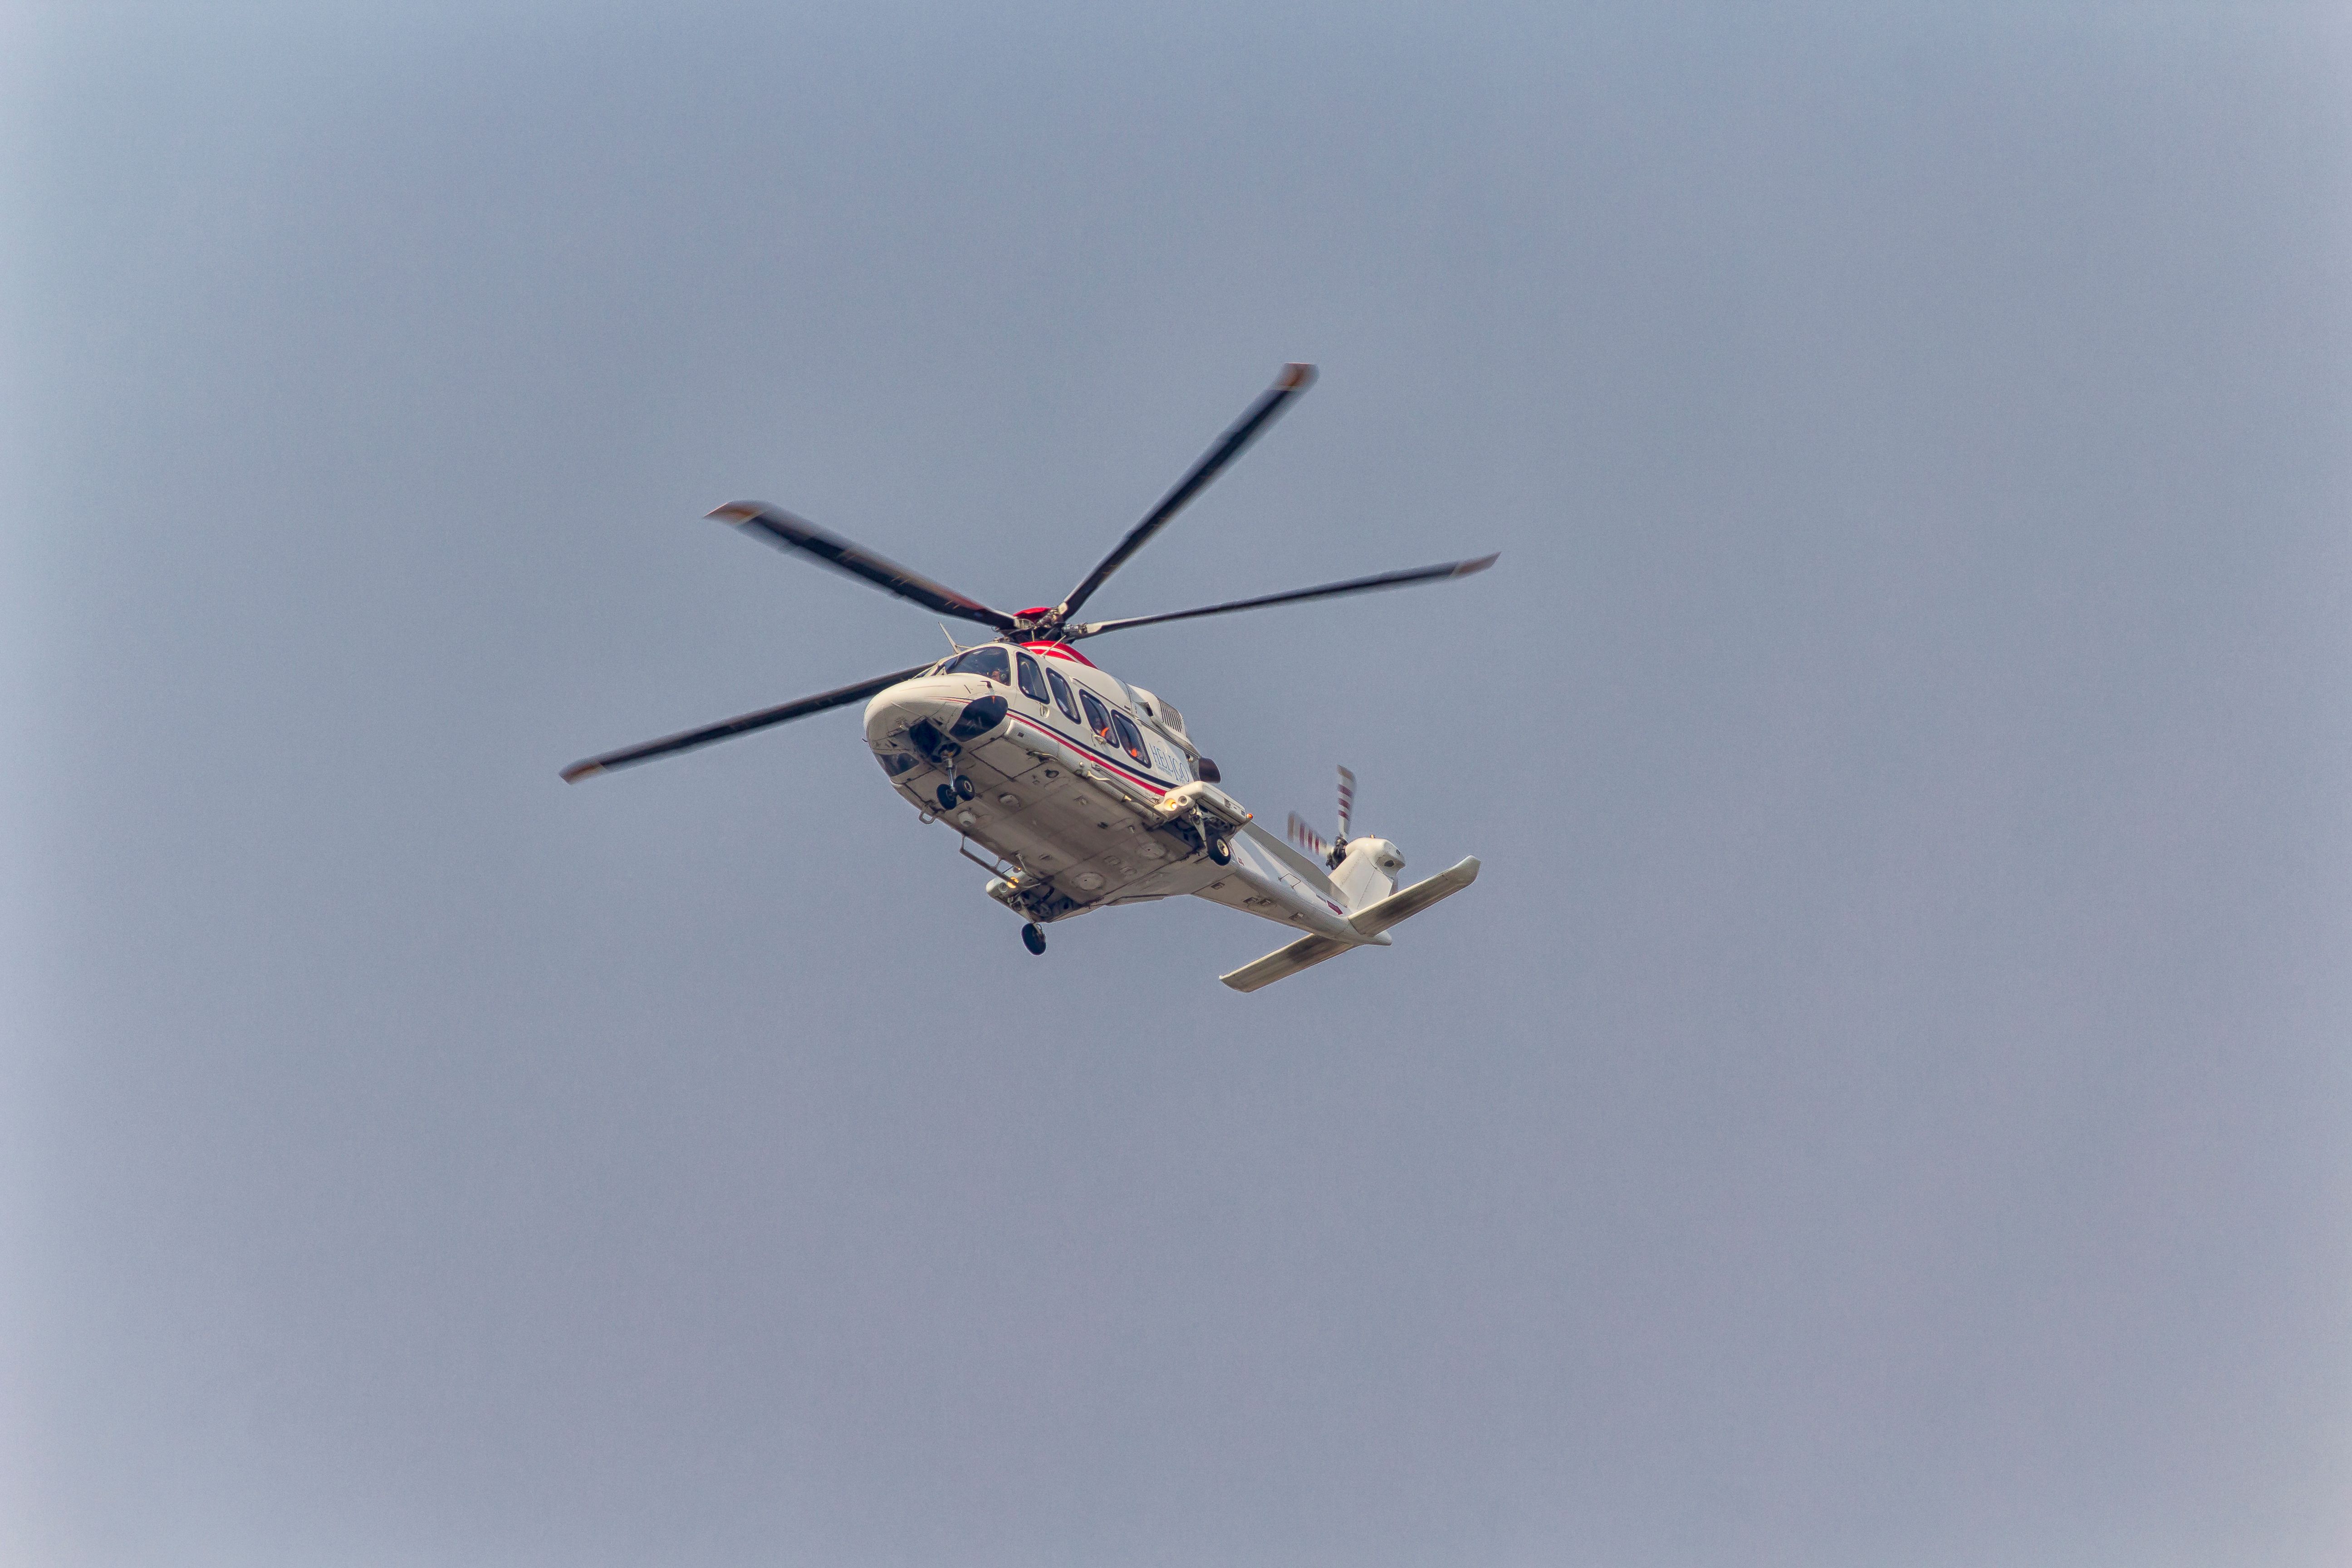 An AW139 Helicopter flying in the sky.